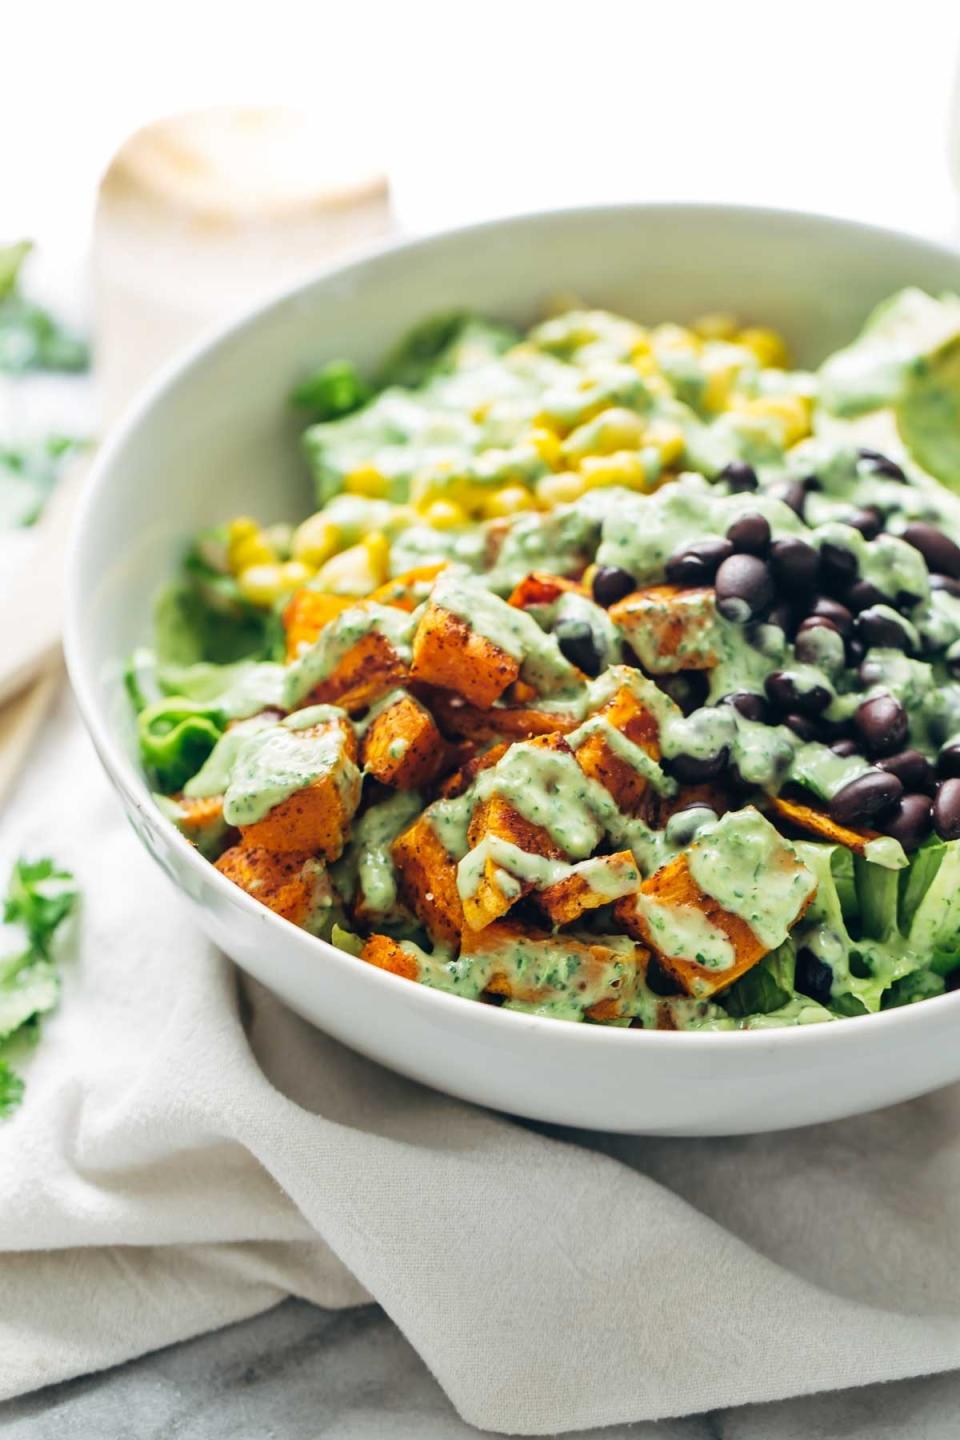 Sweet potatoes and beans make this vegetarian salad super filling. Recipe: Spicy Southwestern Salad with Avocado Dressing